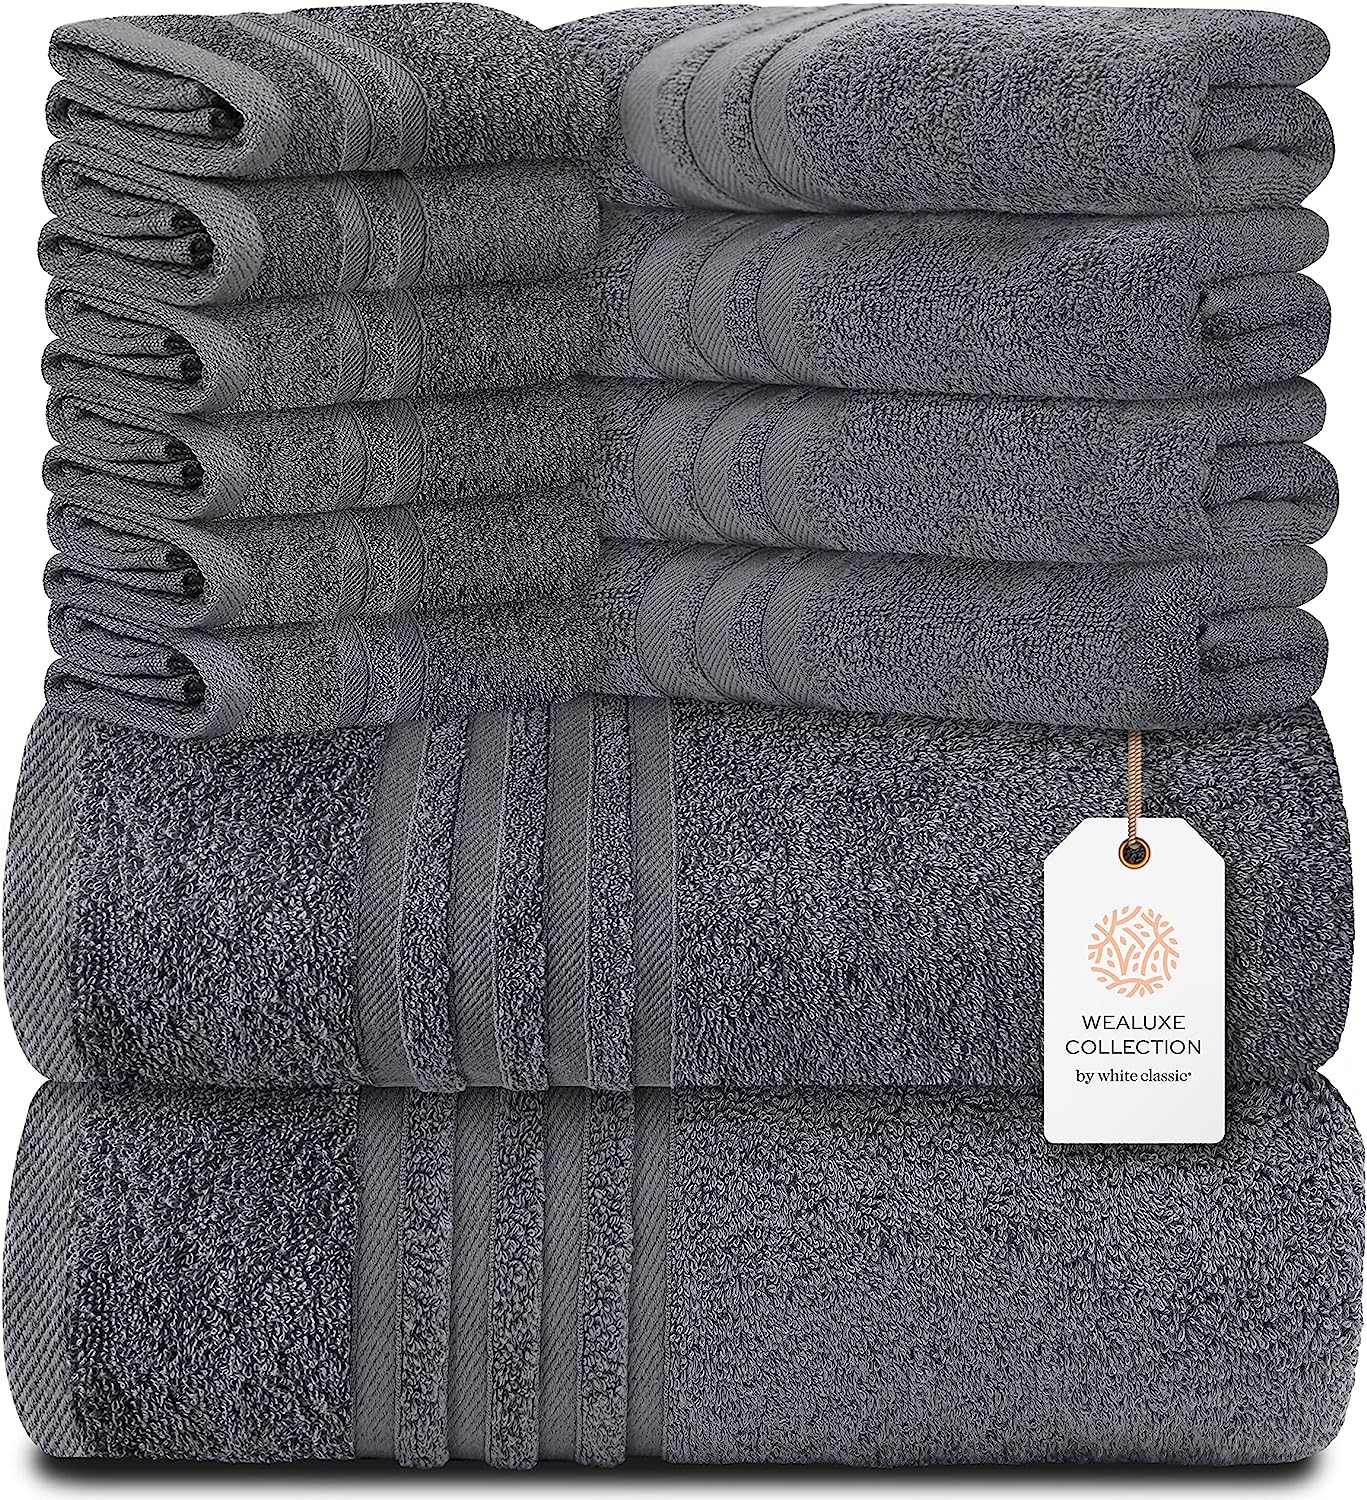 Welauxe Collection 8Pc Gray Towel Set